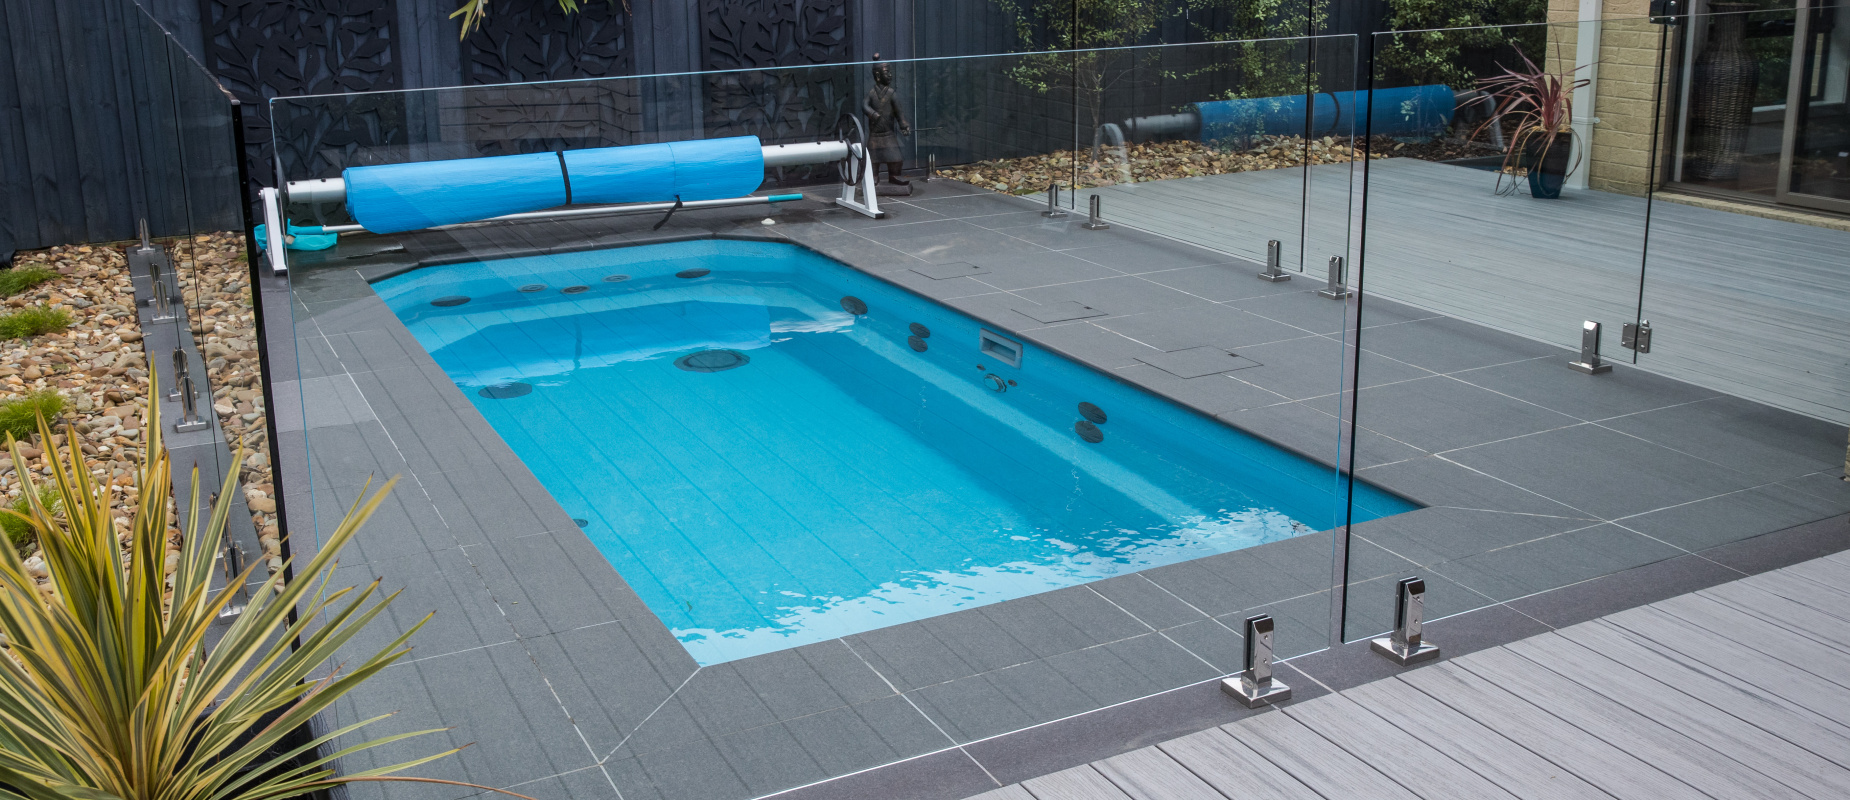 Compass-Pools-Australia_Plunge-Courtyard_Intelligent-pool-with-tiled-around